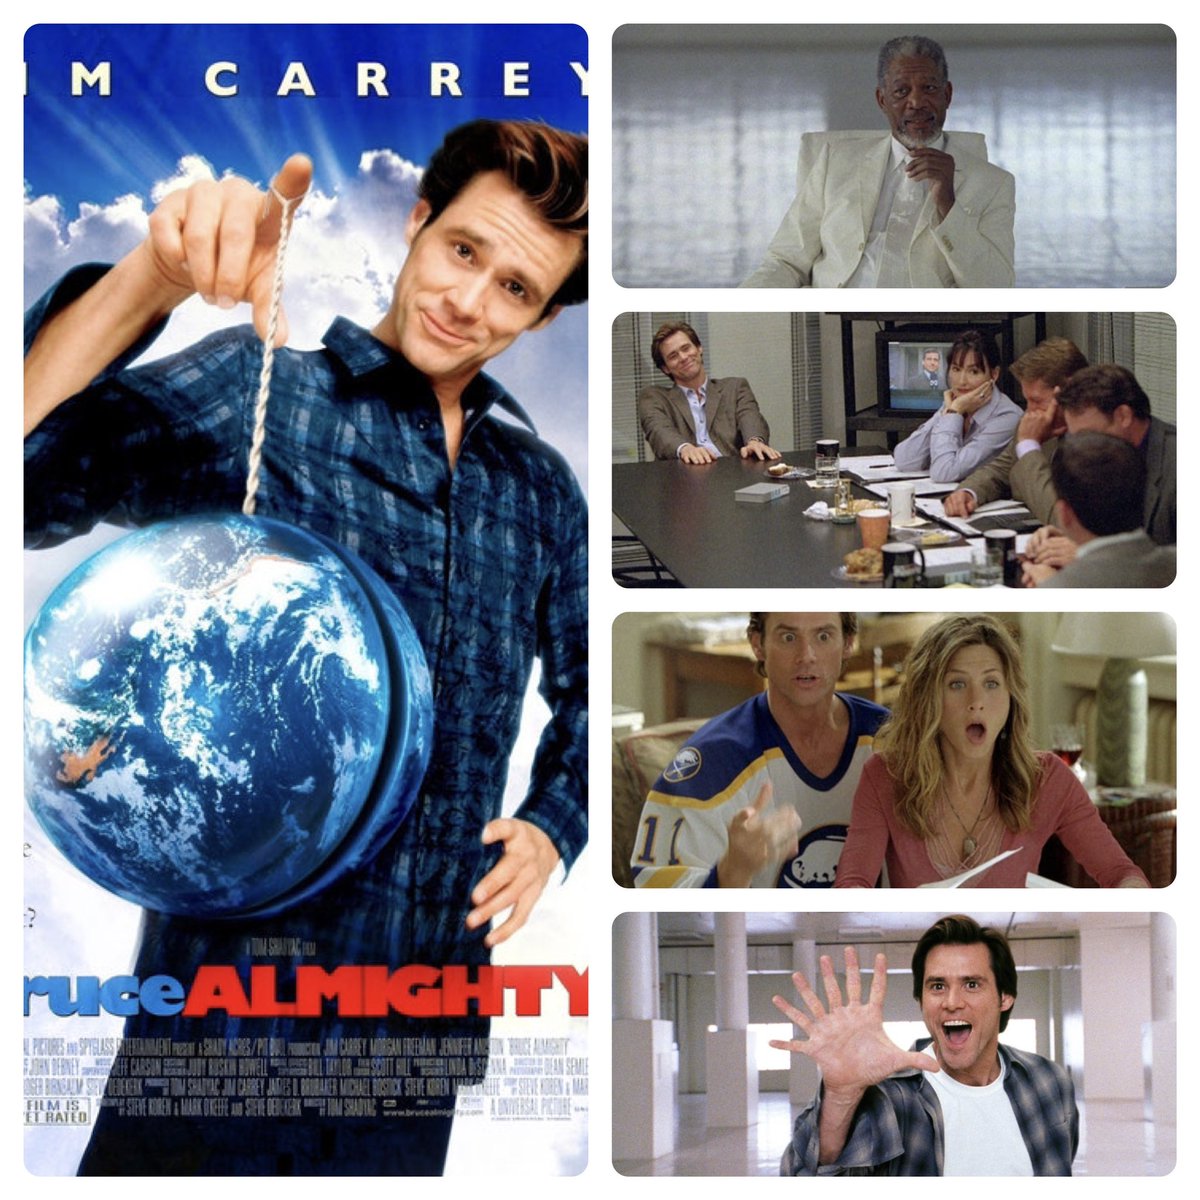 Bruce Almighty celebrates 20th anniversary today.
#brucealmighty #brucealmightymovie #jimcarrey #jimcarreyfans #jimcarreymovies #jimcarreyfilms #morganfreeman #morganfreemanmovies #morganfreemanfans #jenniferaniston #jenniferanistonfan #jenniferanistonmovie #classicmovie